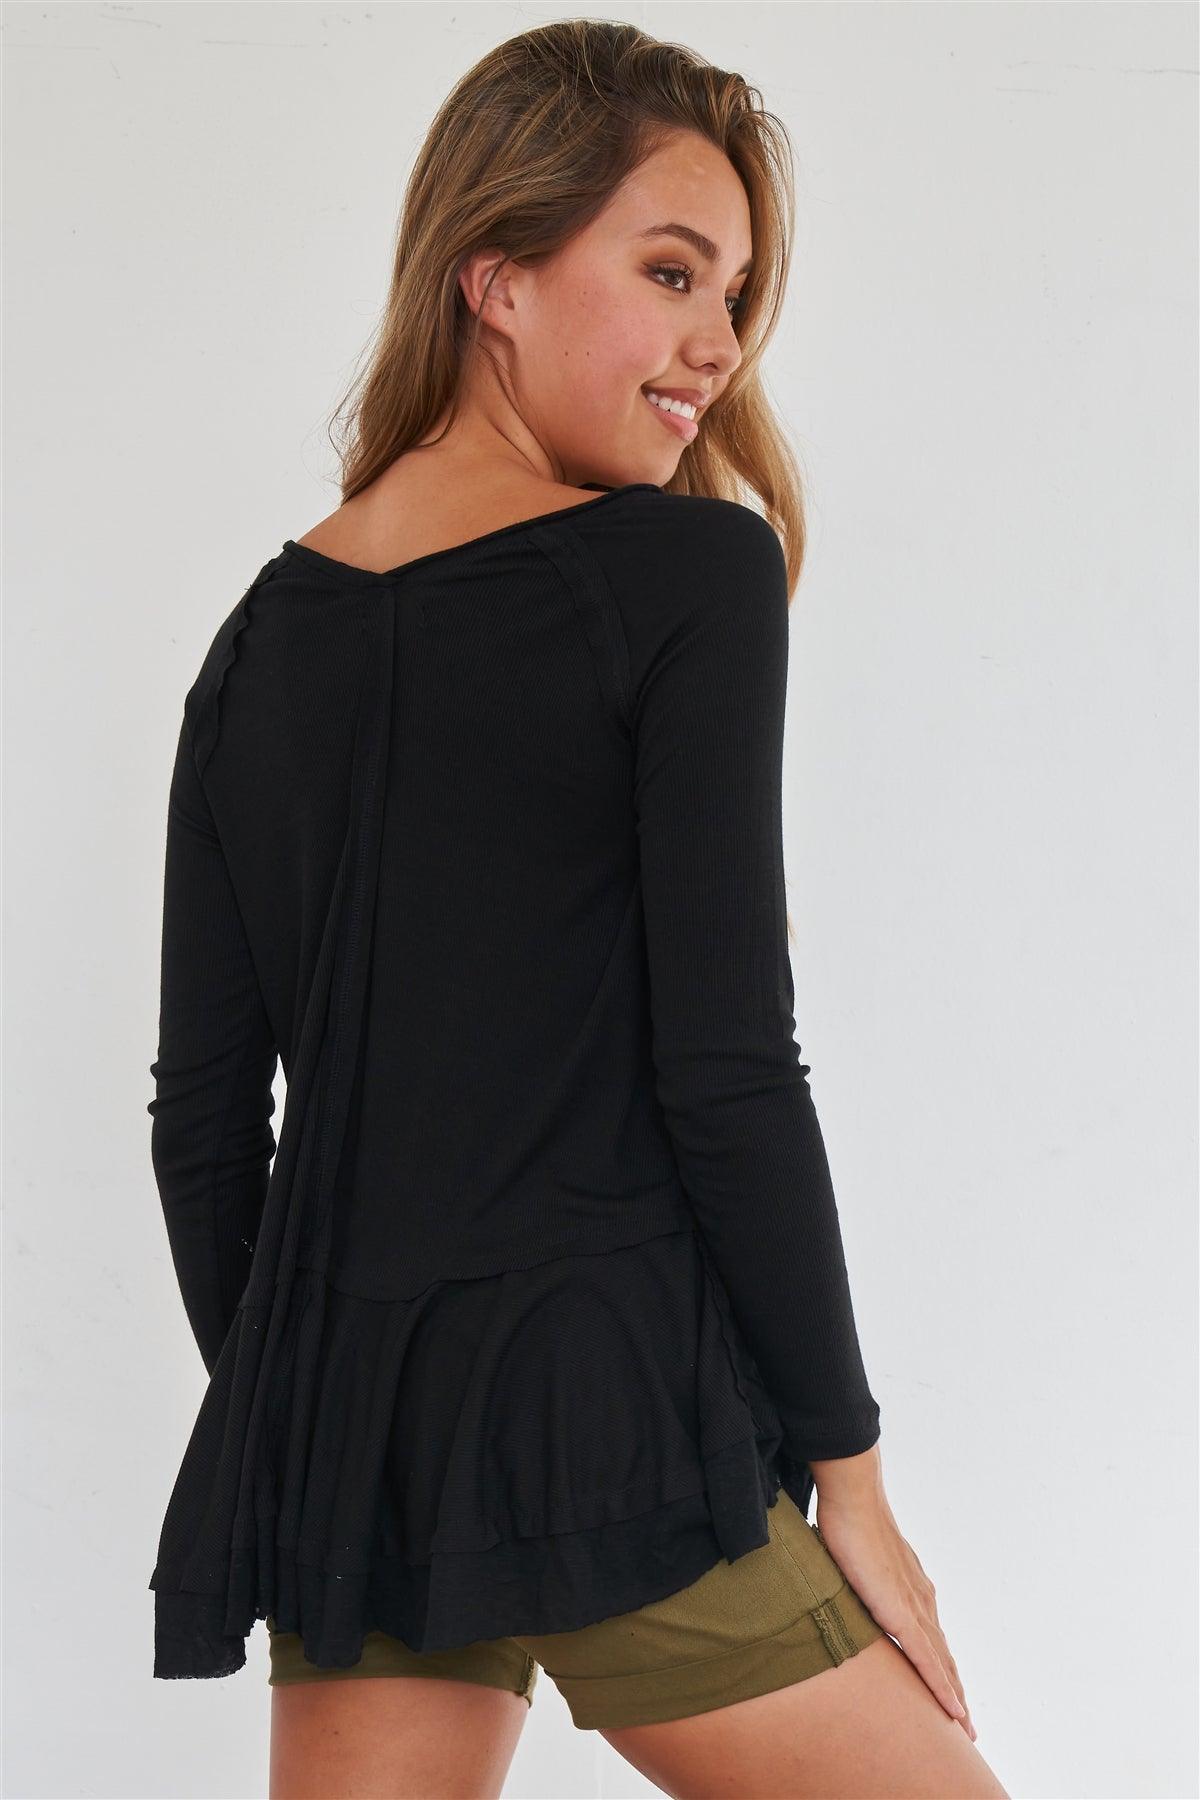 Black Long Sleeve Relaxed Fit Babydoll Knit Top